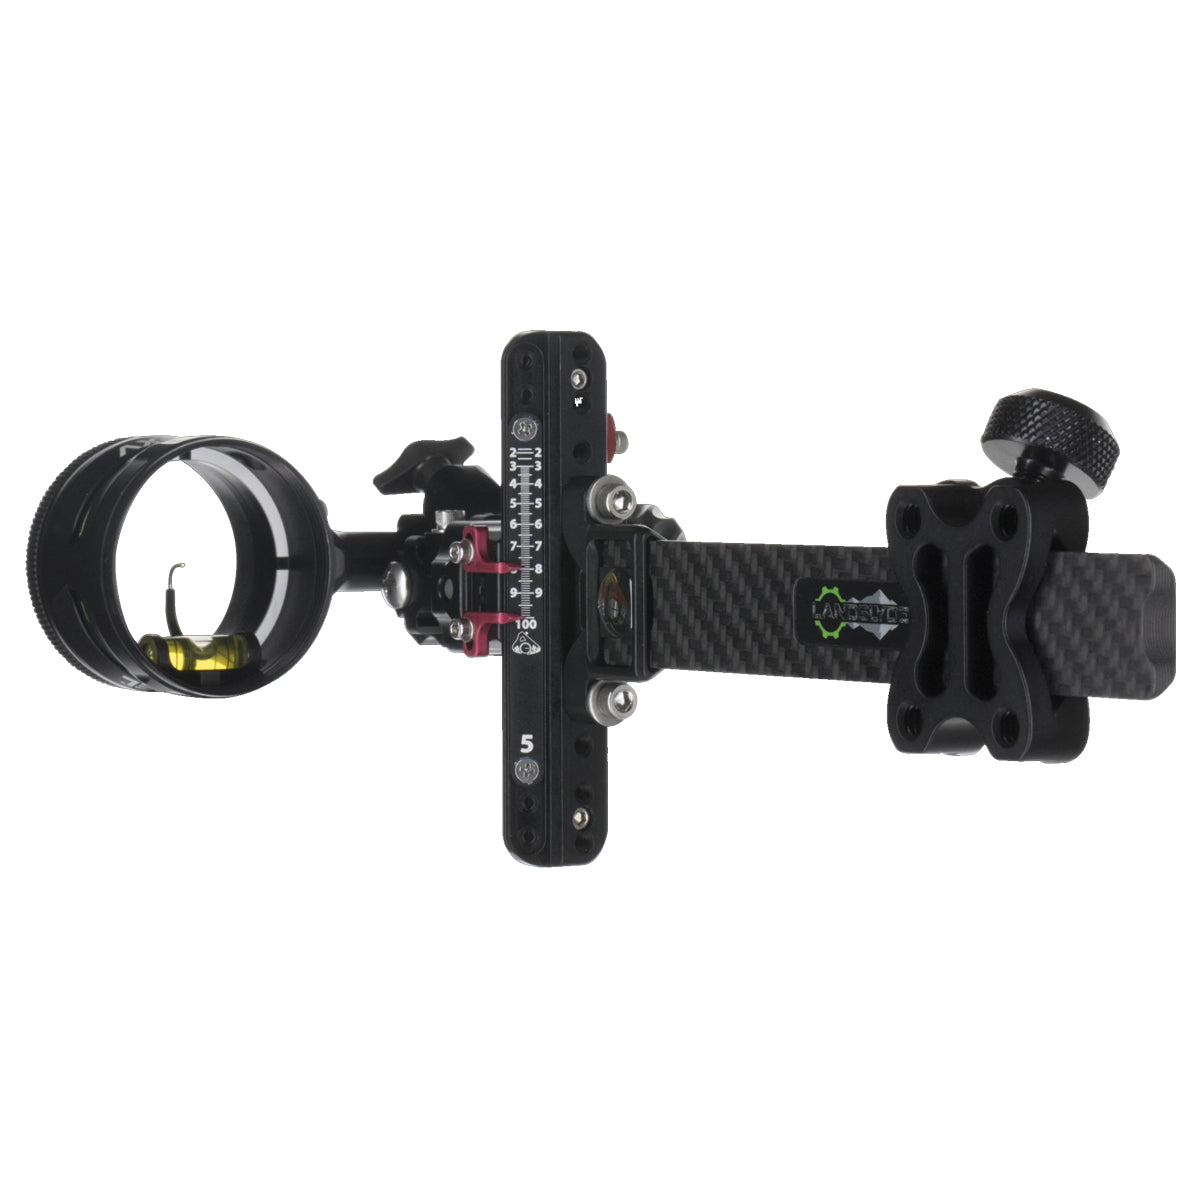 Axcel Landslyde Carbon Pro 3 Pin Bow Sight